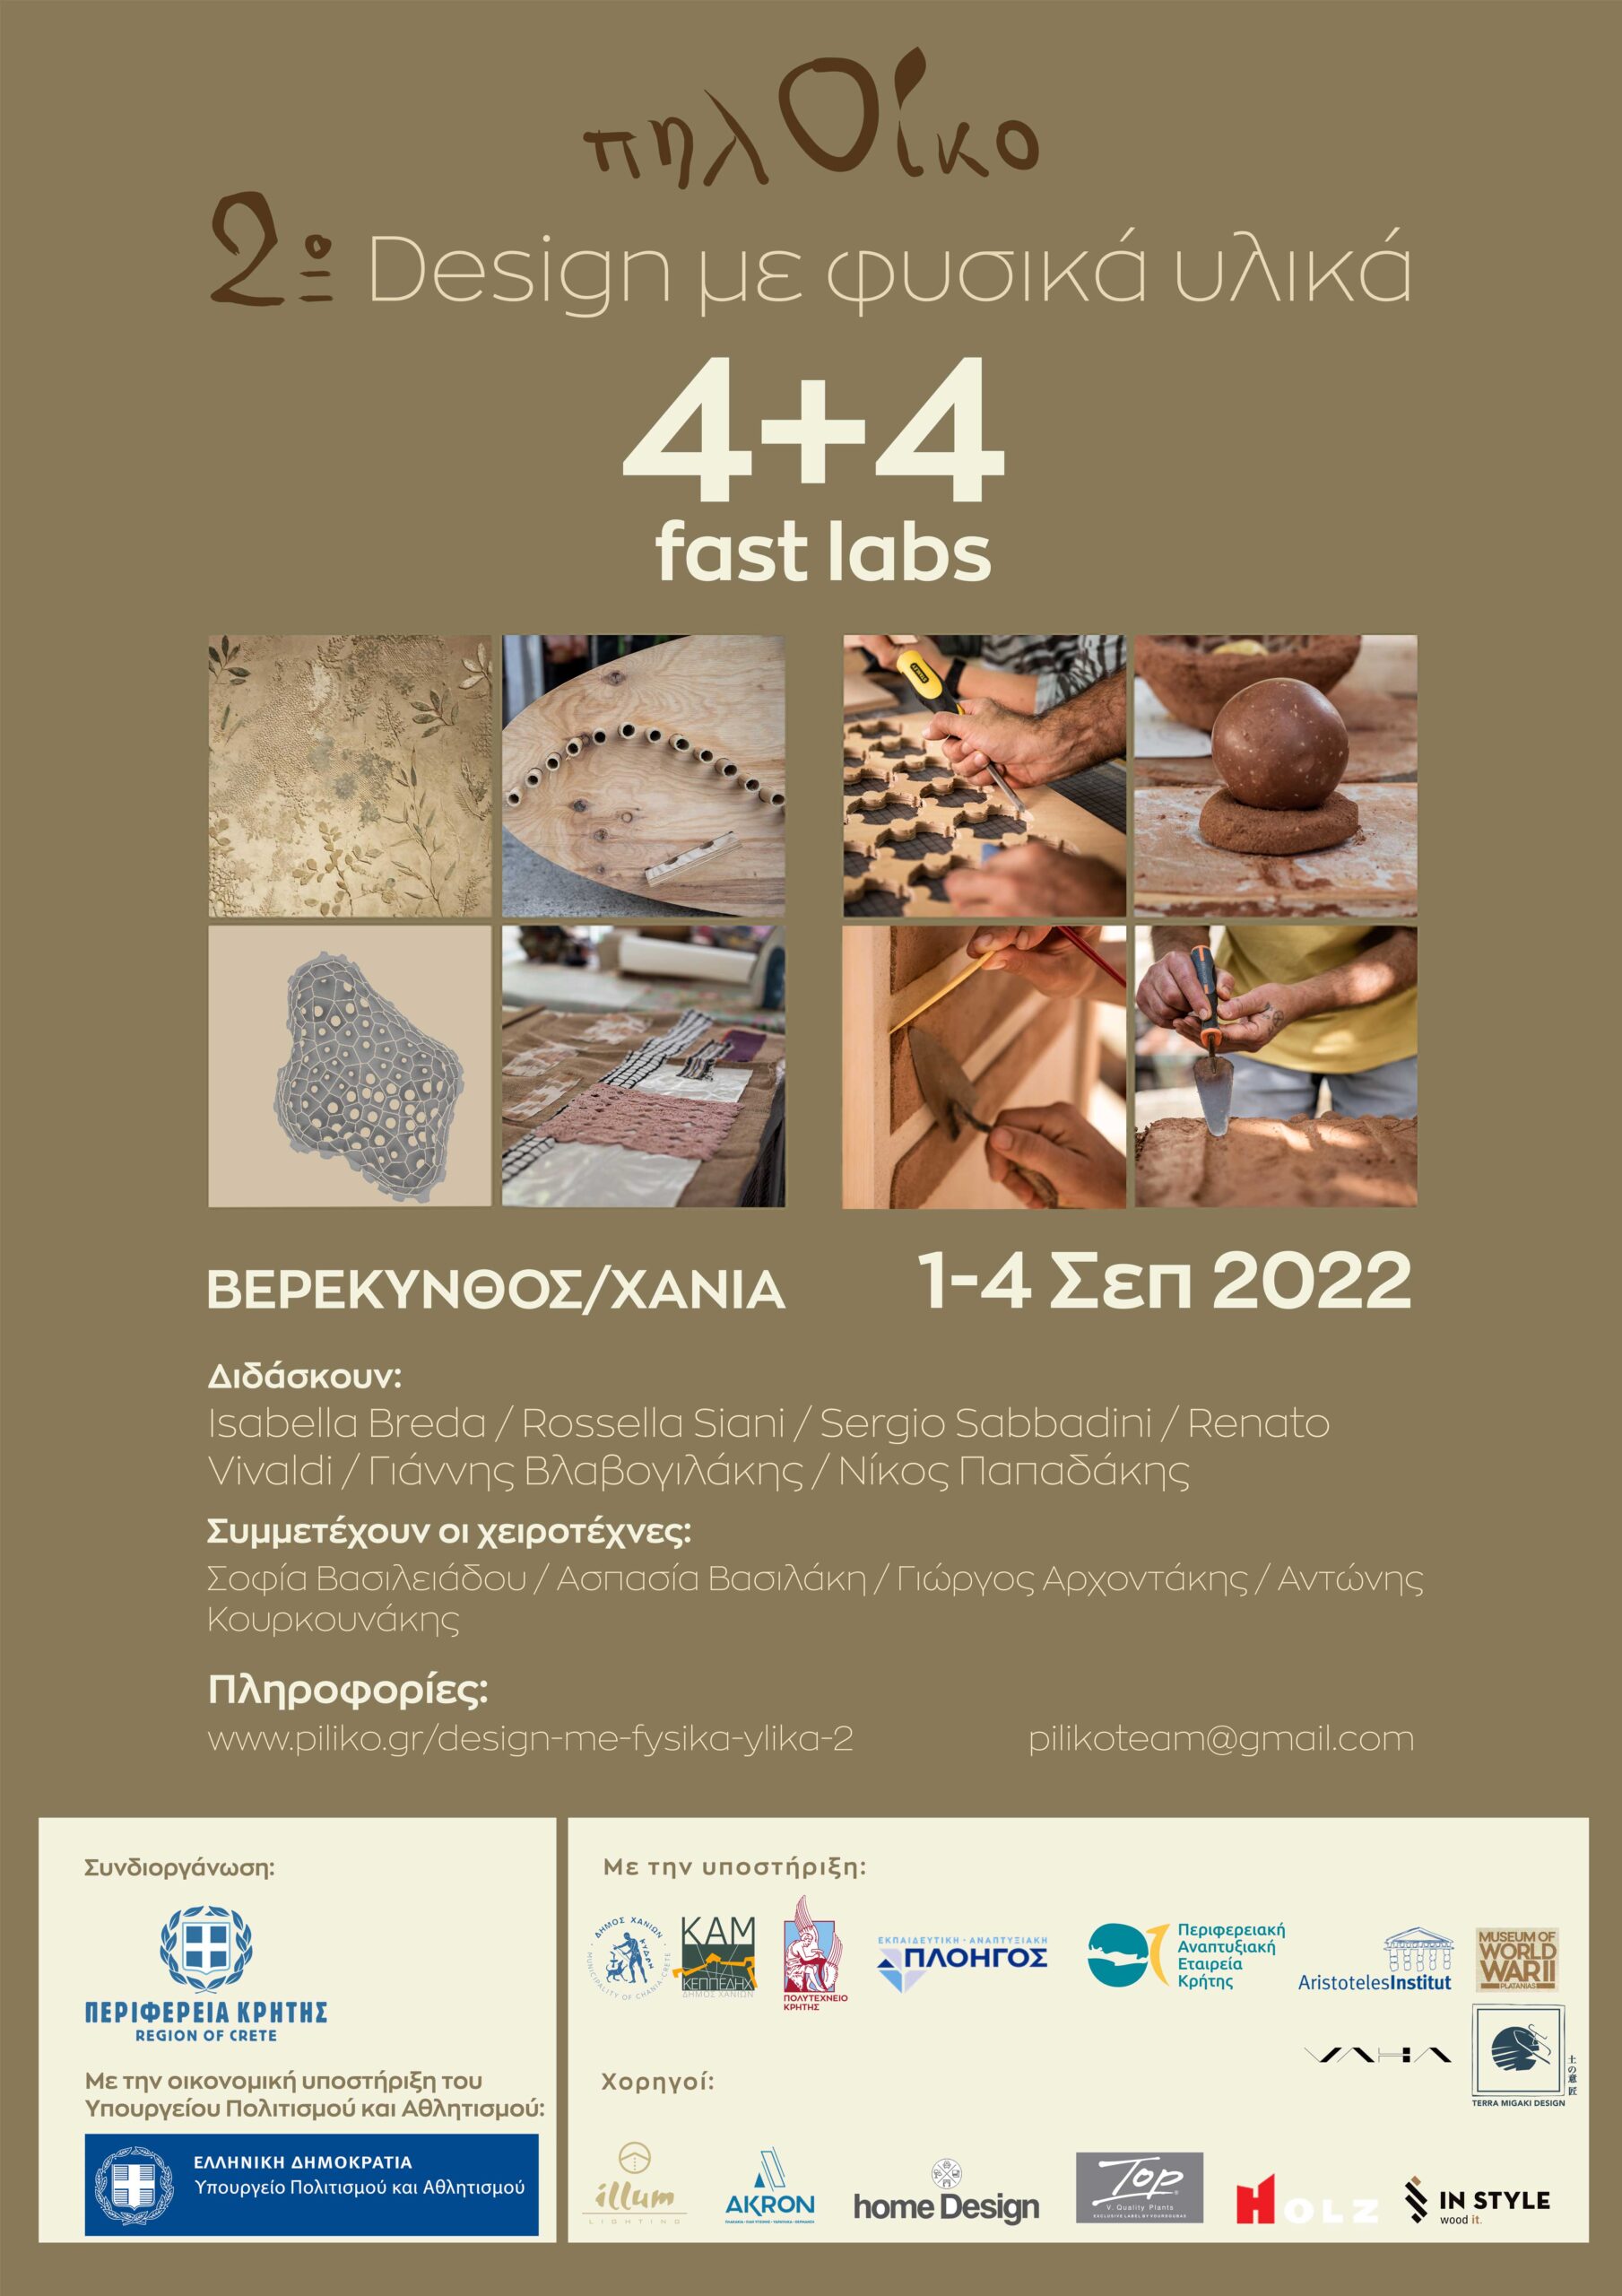 Design Με Φυσικά Υλικά 2022 – 4+4 Fast Labs